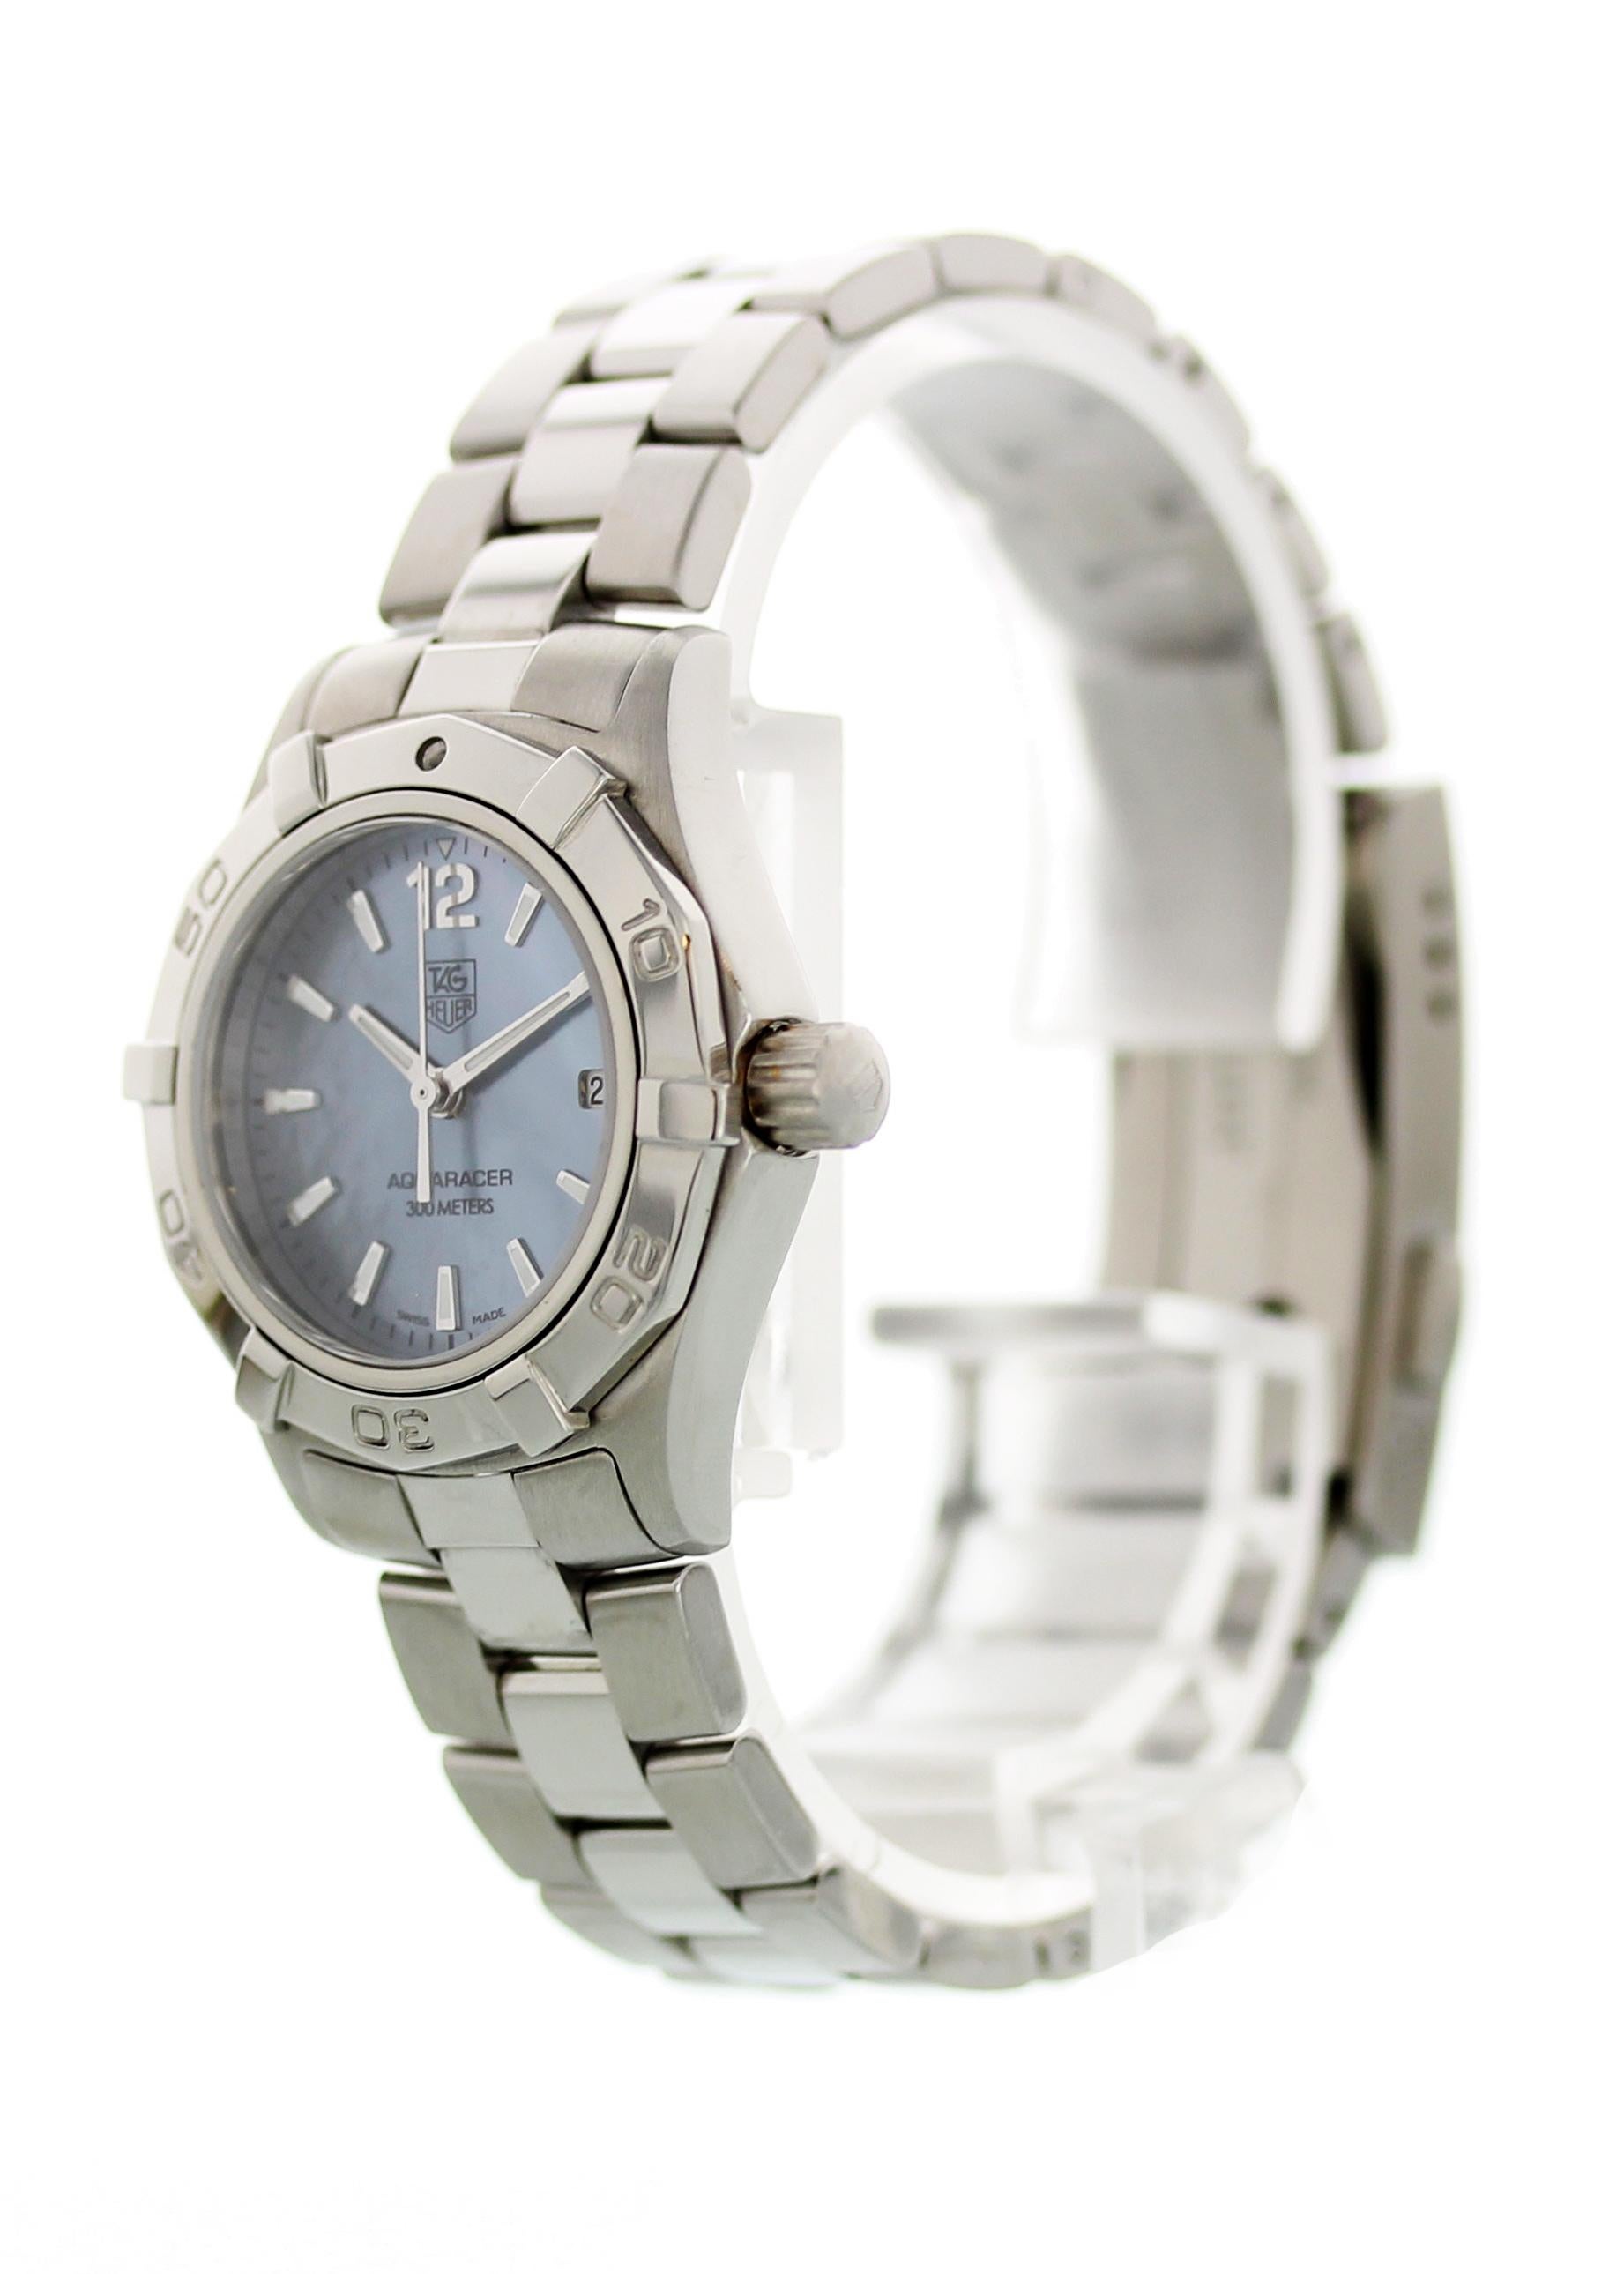 Tag Heuer Aquaracer WAF1417 Ladies watch. 23mm stainless steel case. Unidirectional stainless steel bezel. Mother of pearl dial with luminous hands and indexes. Date display. Stainless steel bracelet with double push button fold over clasp. Will fit